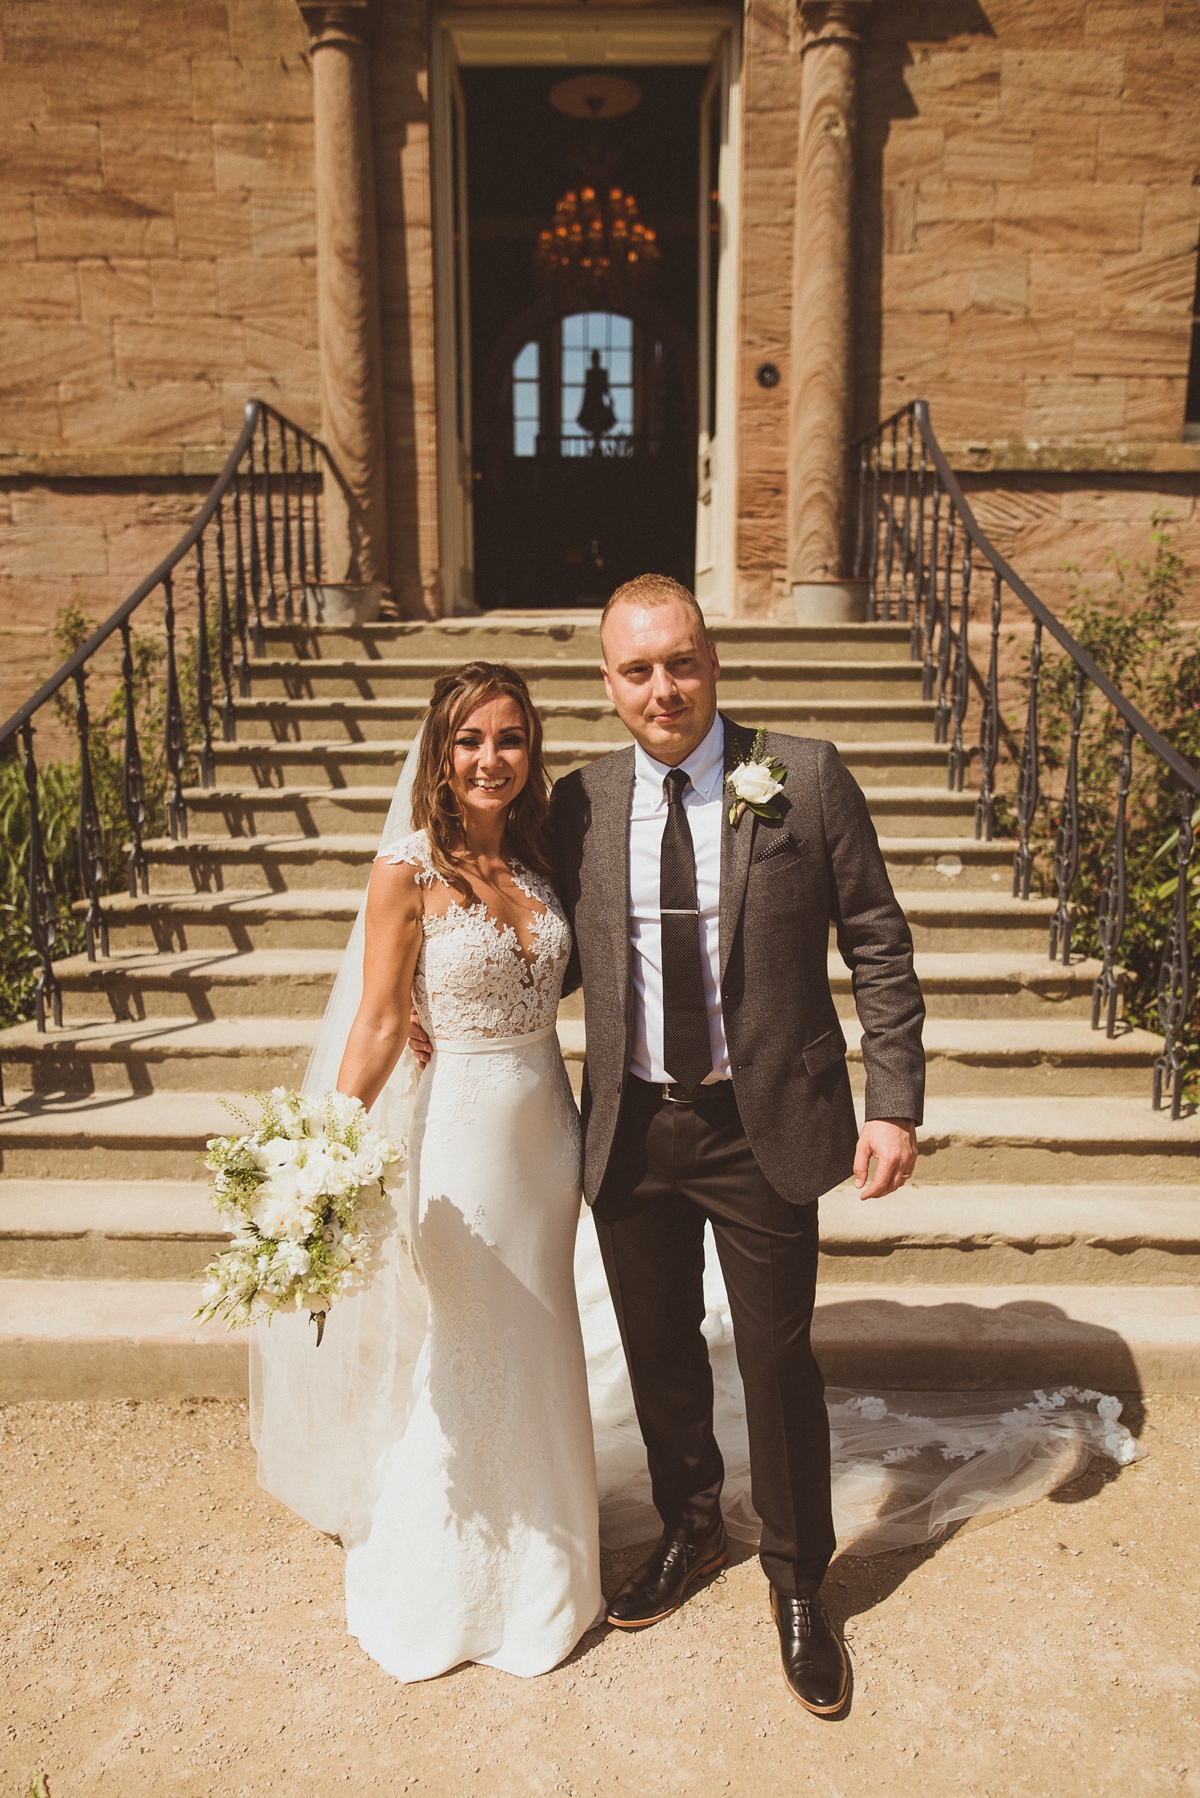 20 A Pronovias bride and her Newton Hall wedding in Northumberland